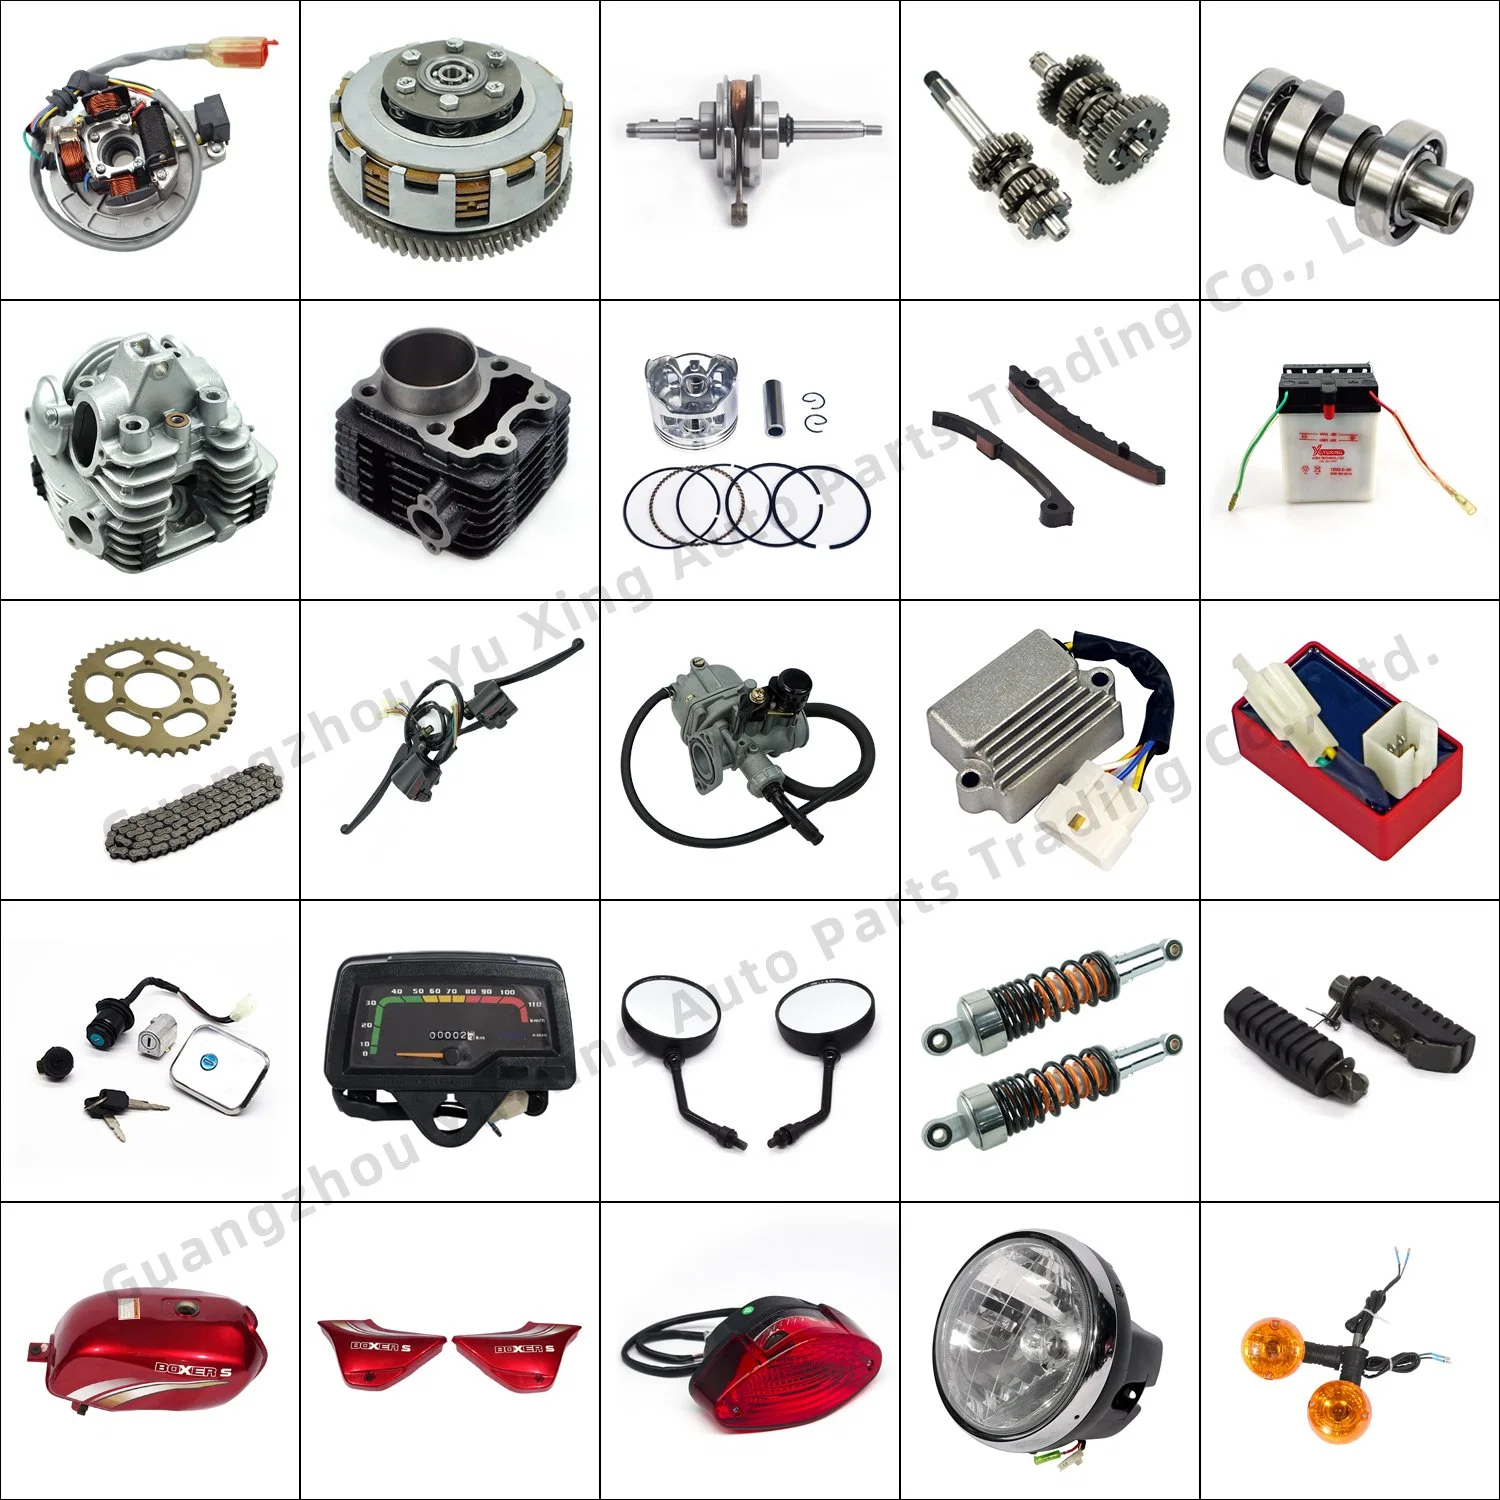 Motorcycle Spare Part Cylinder Head/Speedometer/Carburetor/Camshaft/Clutch/Chain and Sprocket/Headlight/Motorcycle Engine Parts